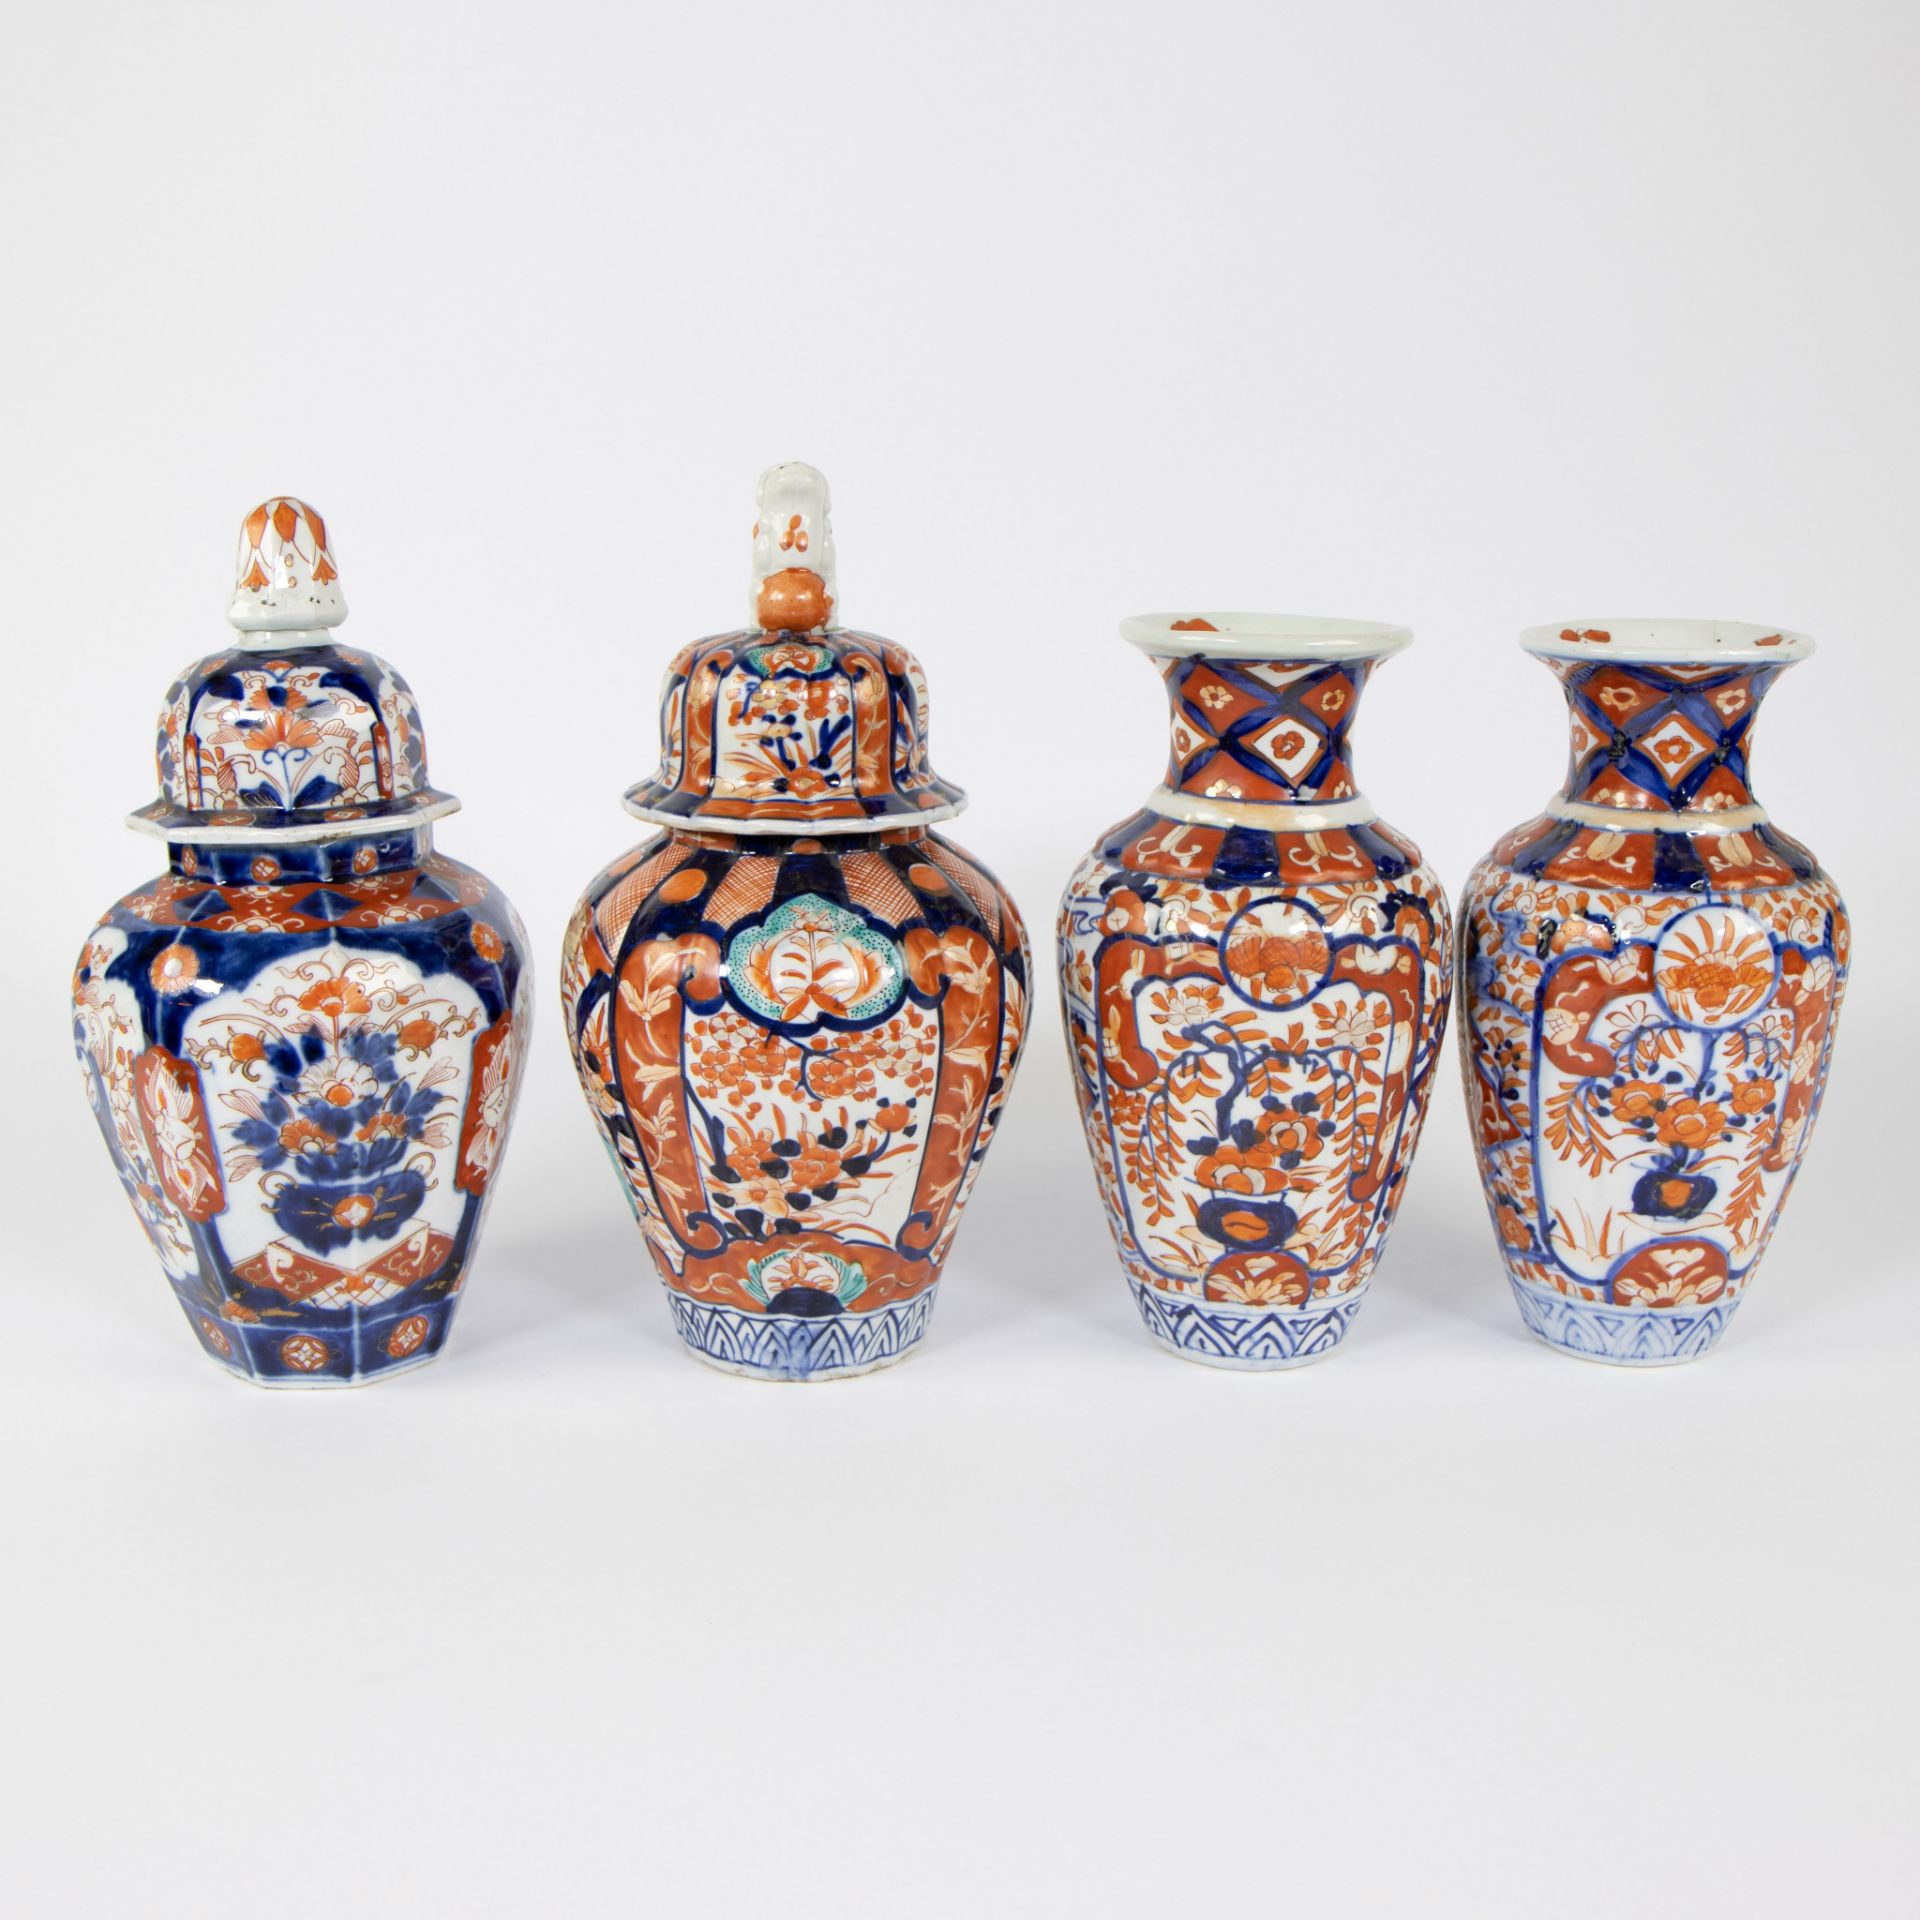 Pair of Japanese Imari vases and 2 lidded vases, 19th century - Image 4 of 6